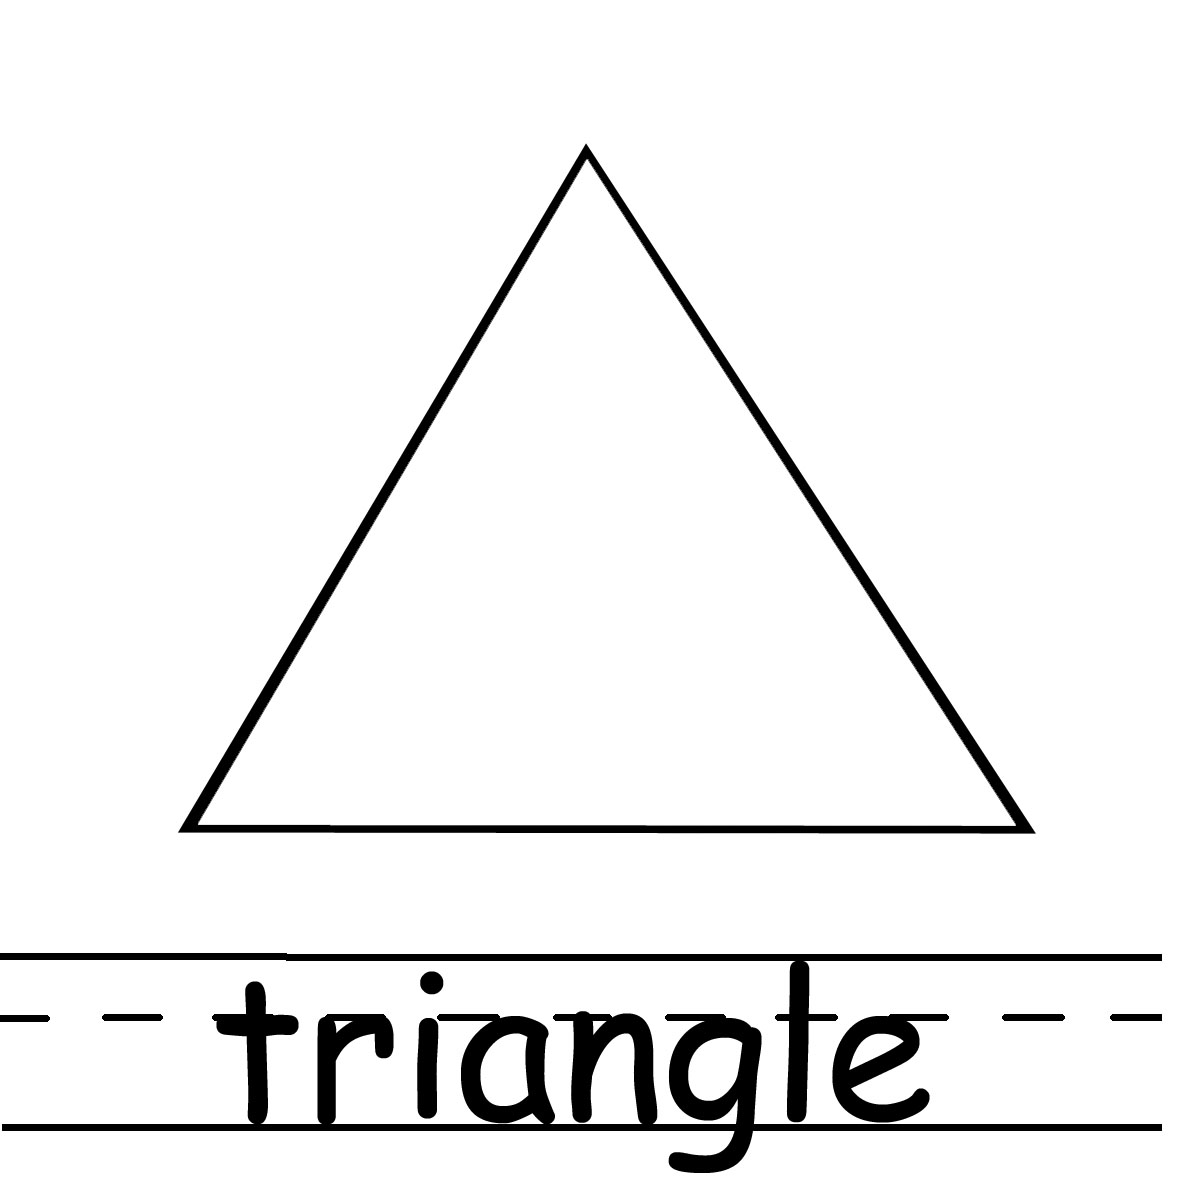 New Triangle Coloring Page with simple drawing